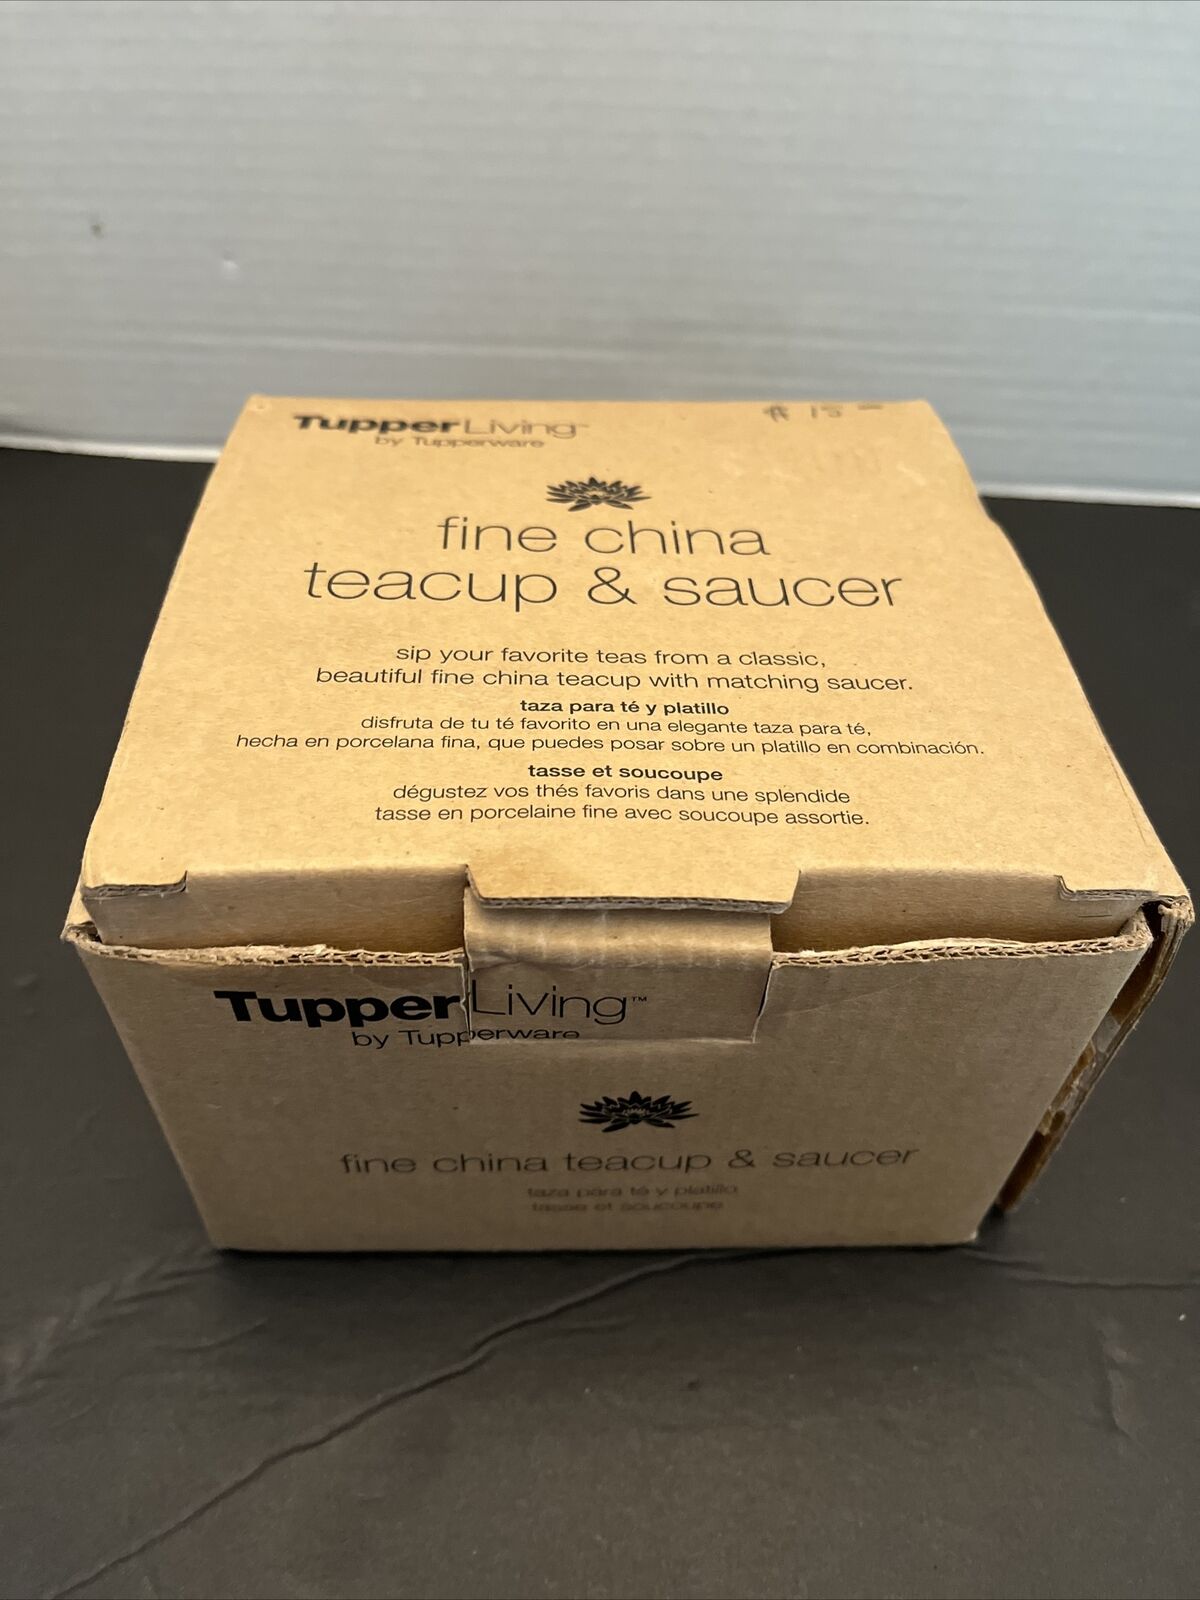 NEW Tupperware TupperLiving Fine China Teacup & Saucer In Box Read Description